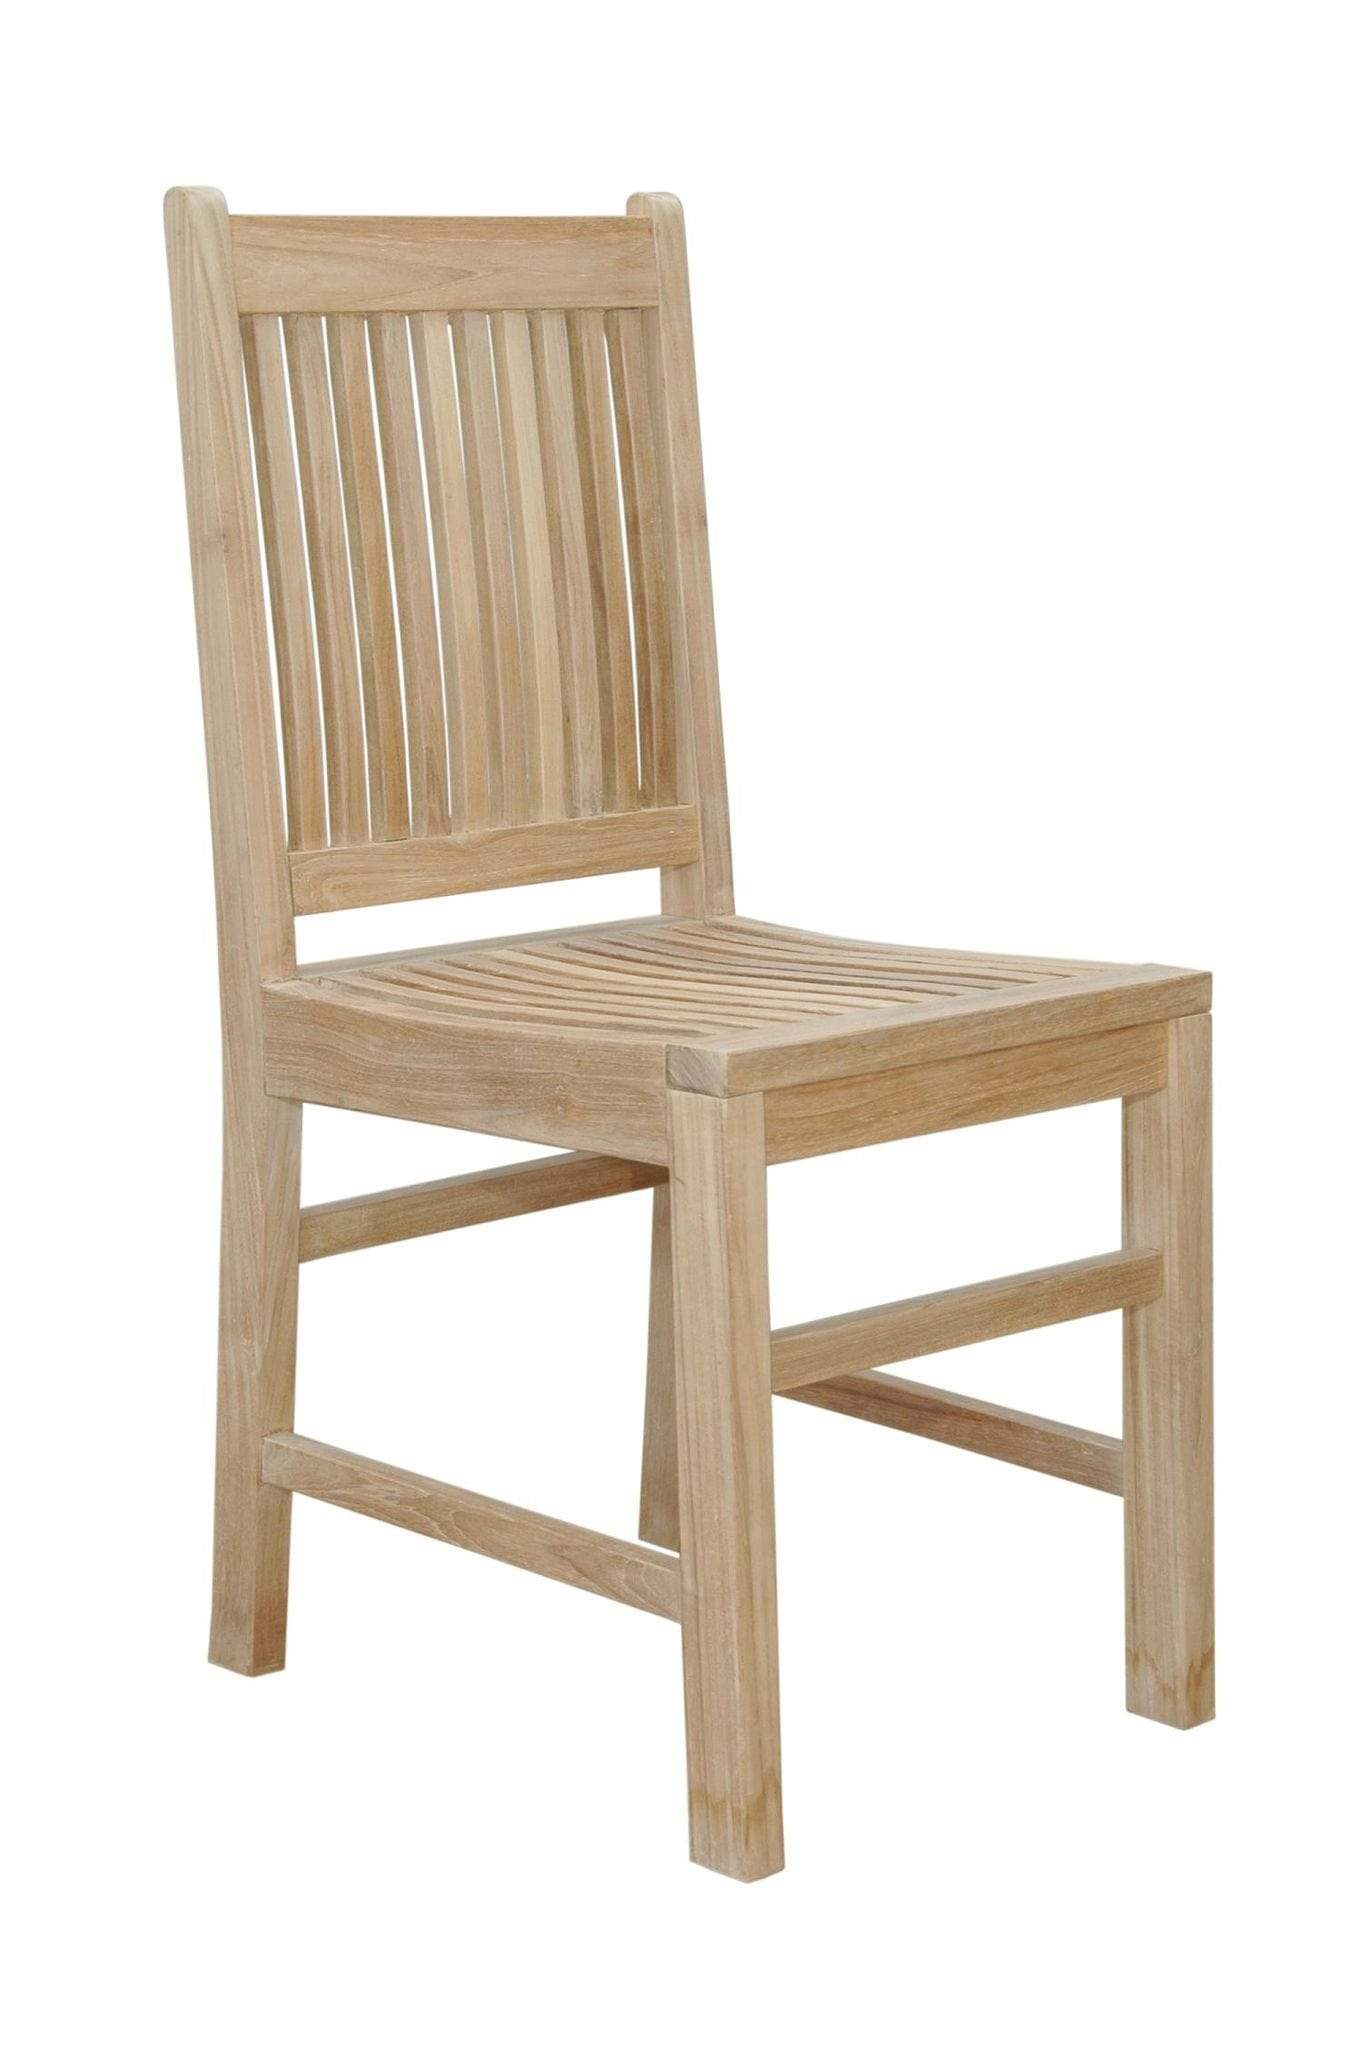 Anderson Teak Outdoor Dining Chairs Anderson Teak Saratoga Dining Chair